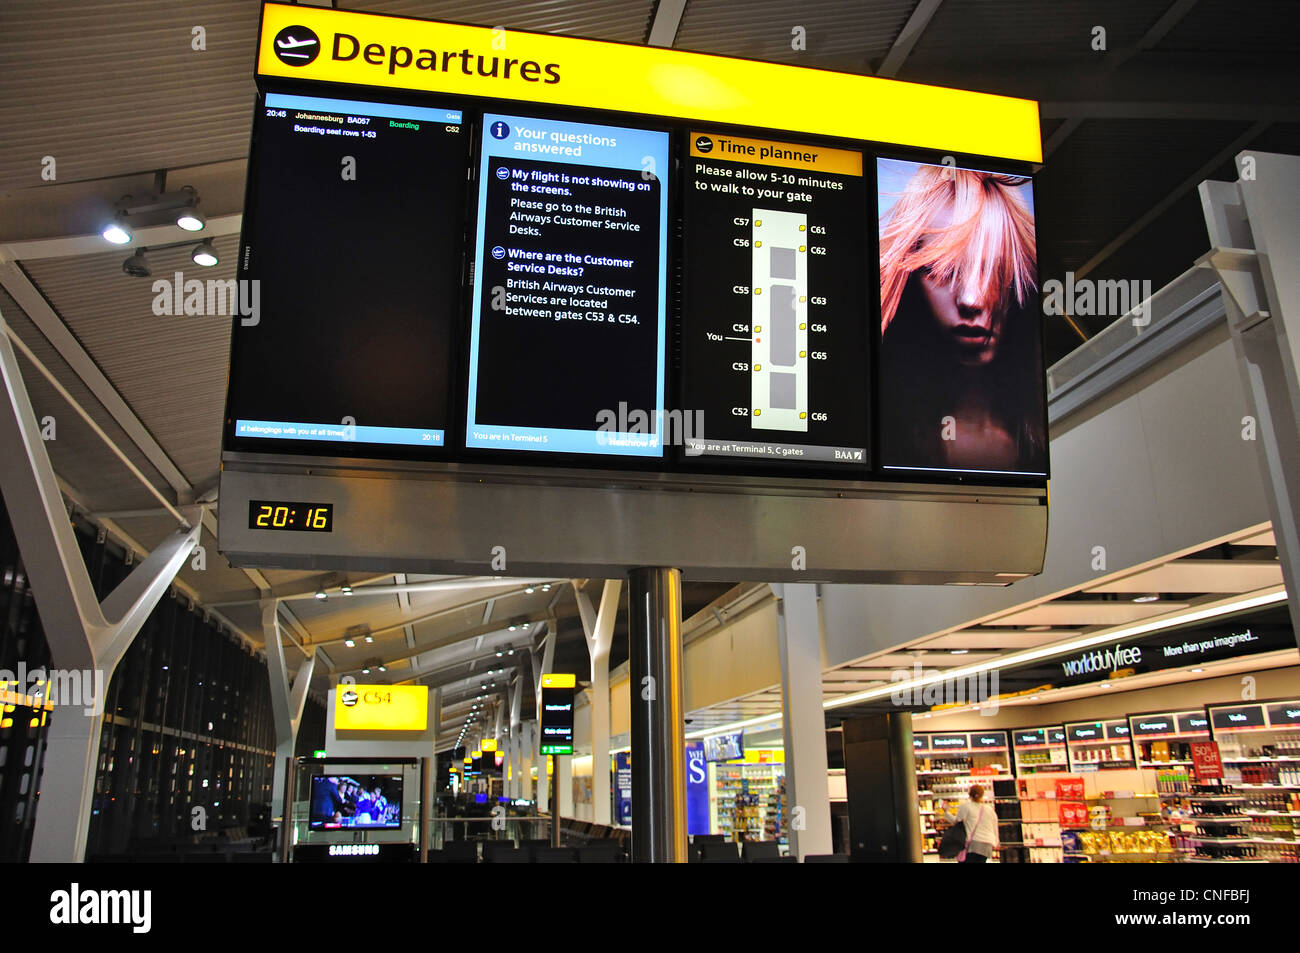 Electronic departure board in OR Tambo International Airport, Johannesburg, Gauteng Province, Republic of South Africa Stock Photo